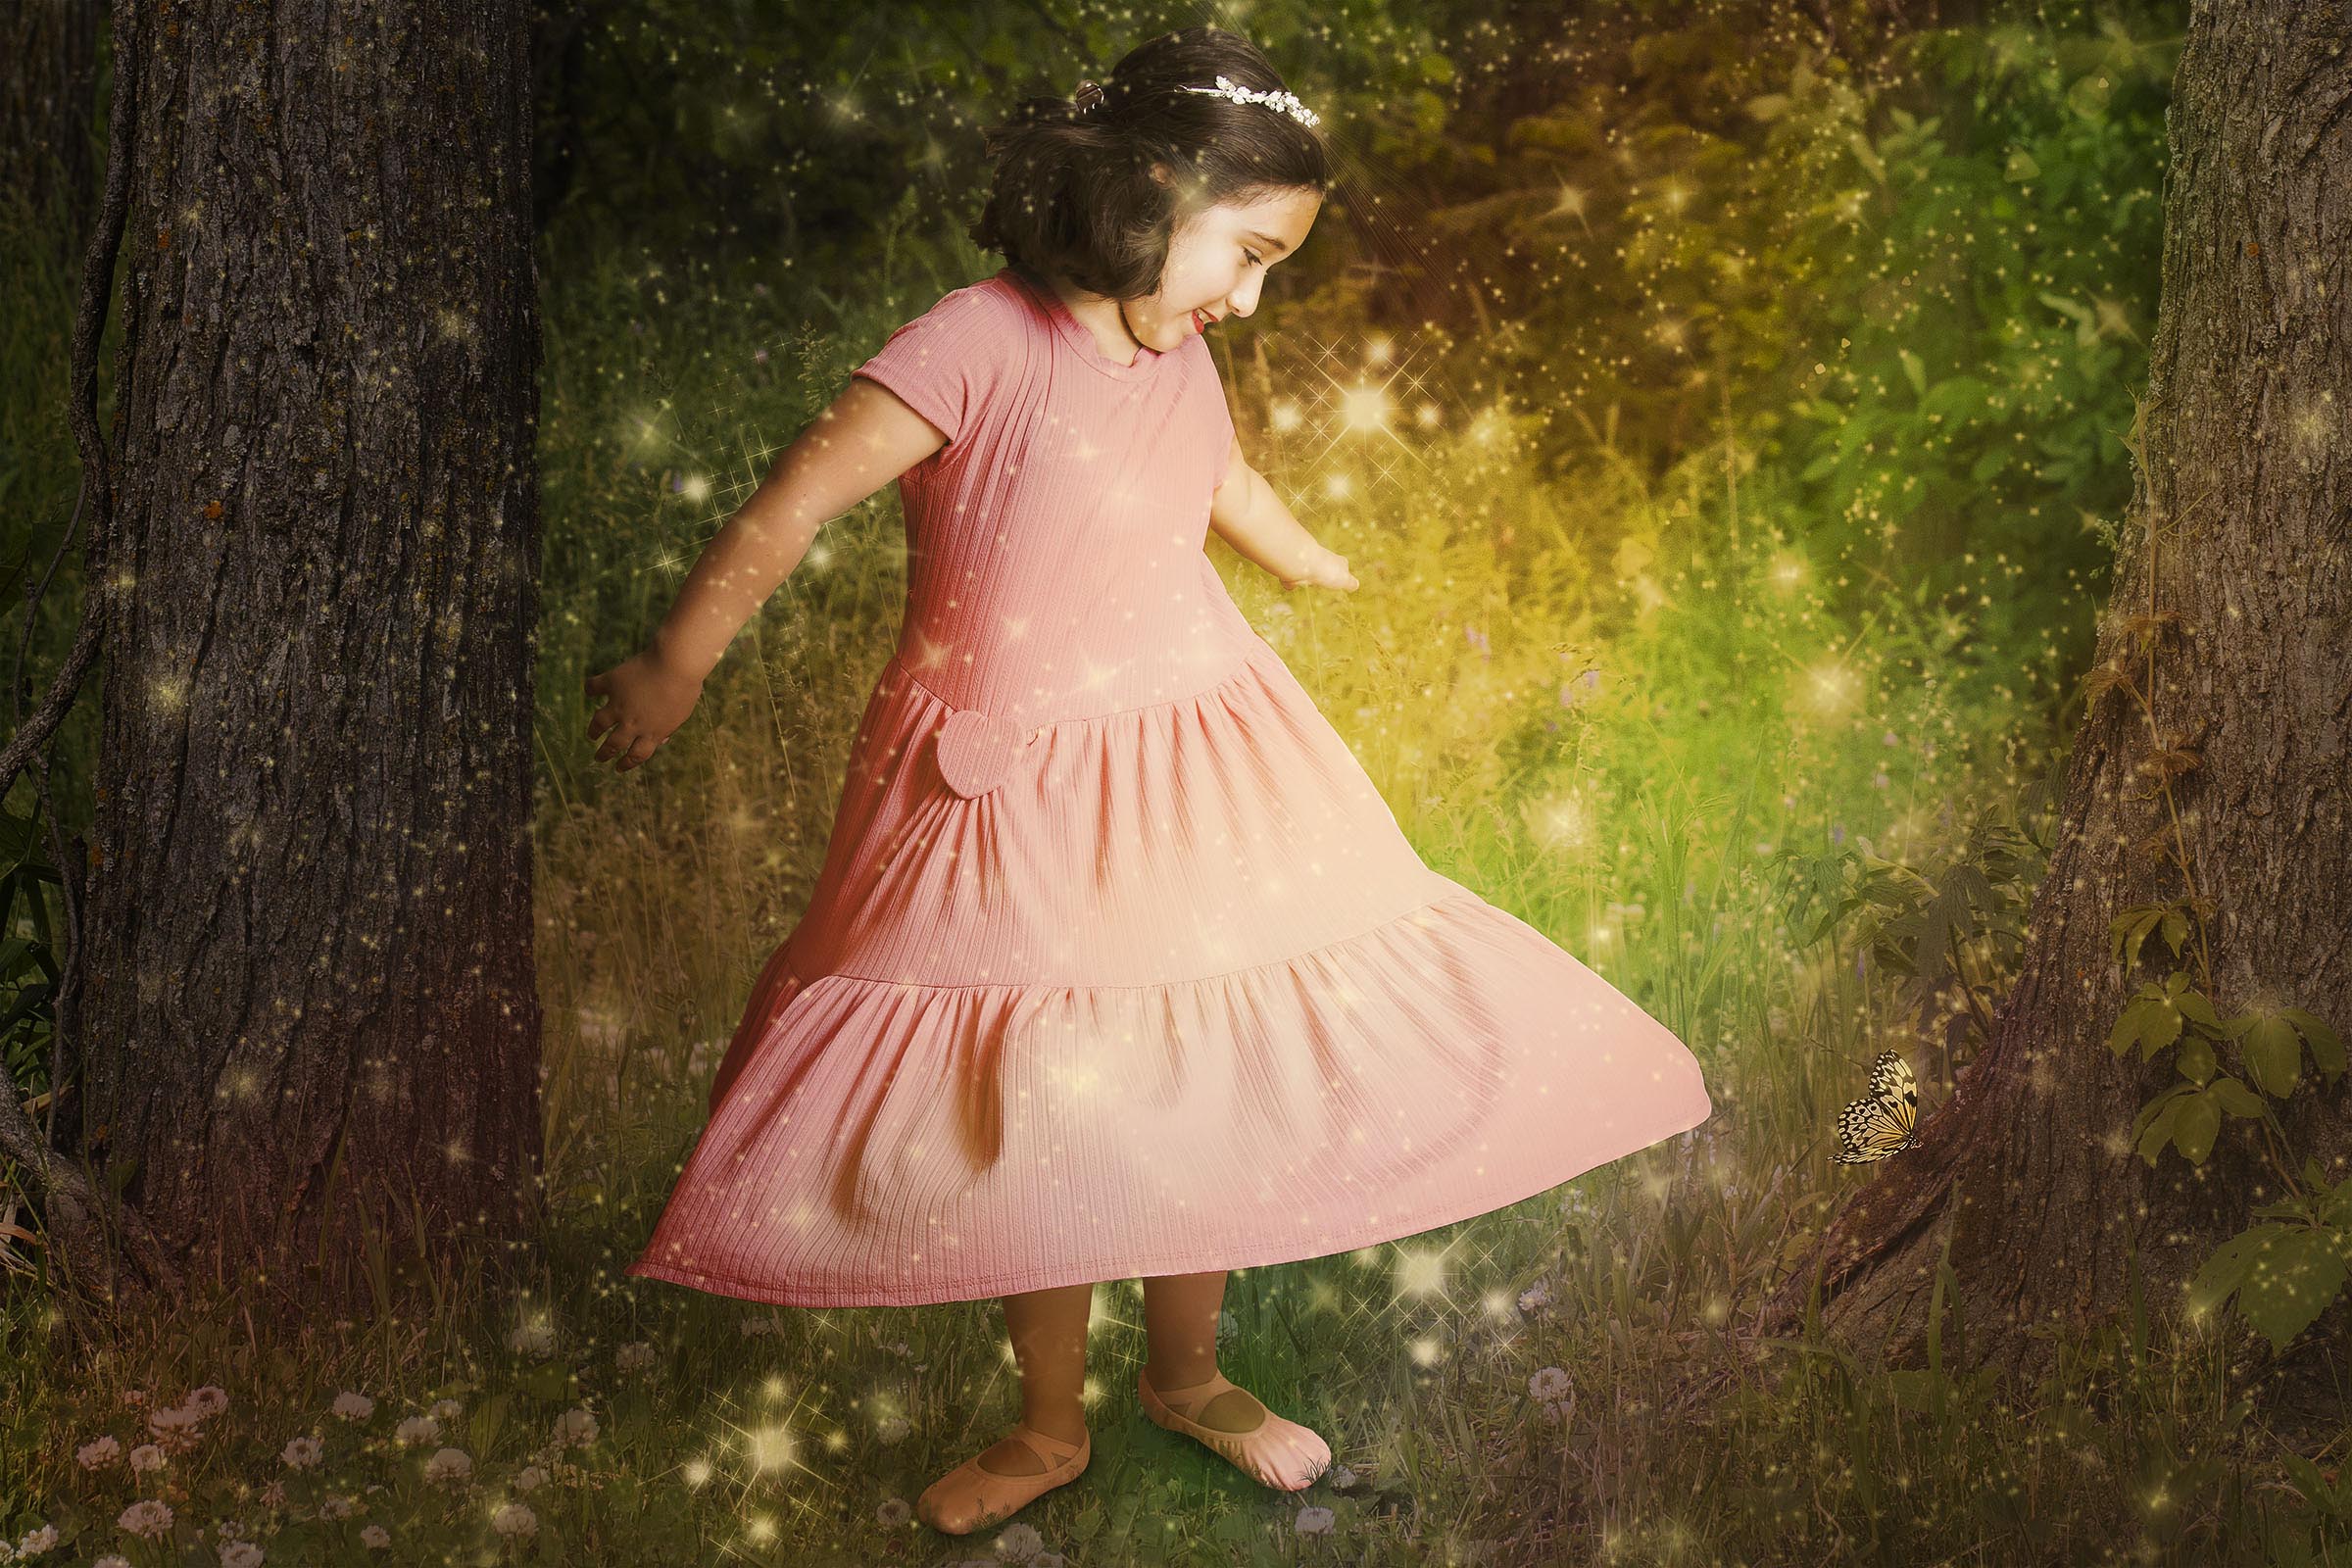 Princess girl dancing in the forest with butterfly composite by Vaudreuil-Soulanges and West Island of Montreal photographer Tobi Malette